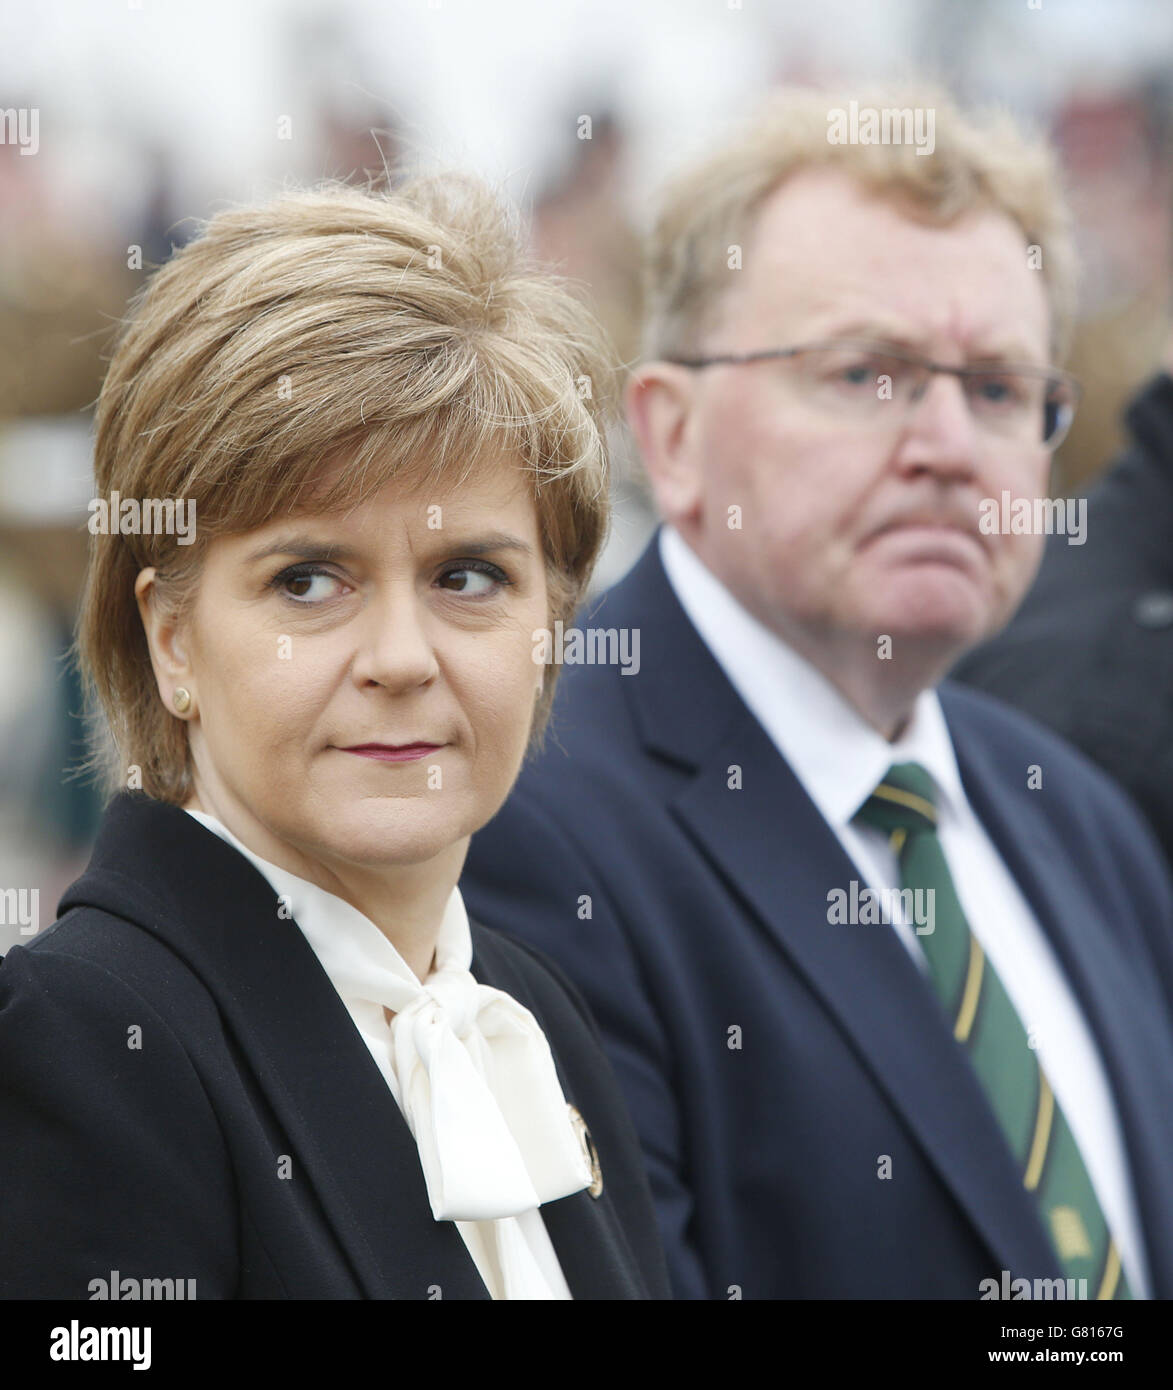 Scottish First Minister Nicola Sturgeon and David Mundell during a special service to commemorate the 100th anniversary of the Quintinshill rail crash, Britain's worst rail disaster. Stock Photo